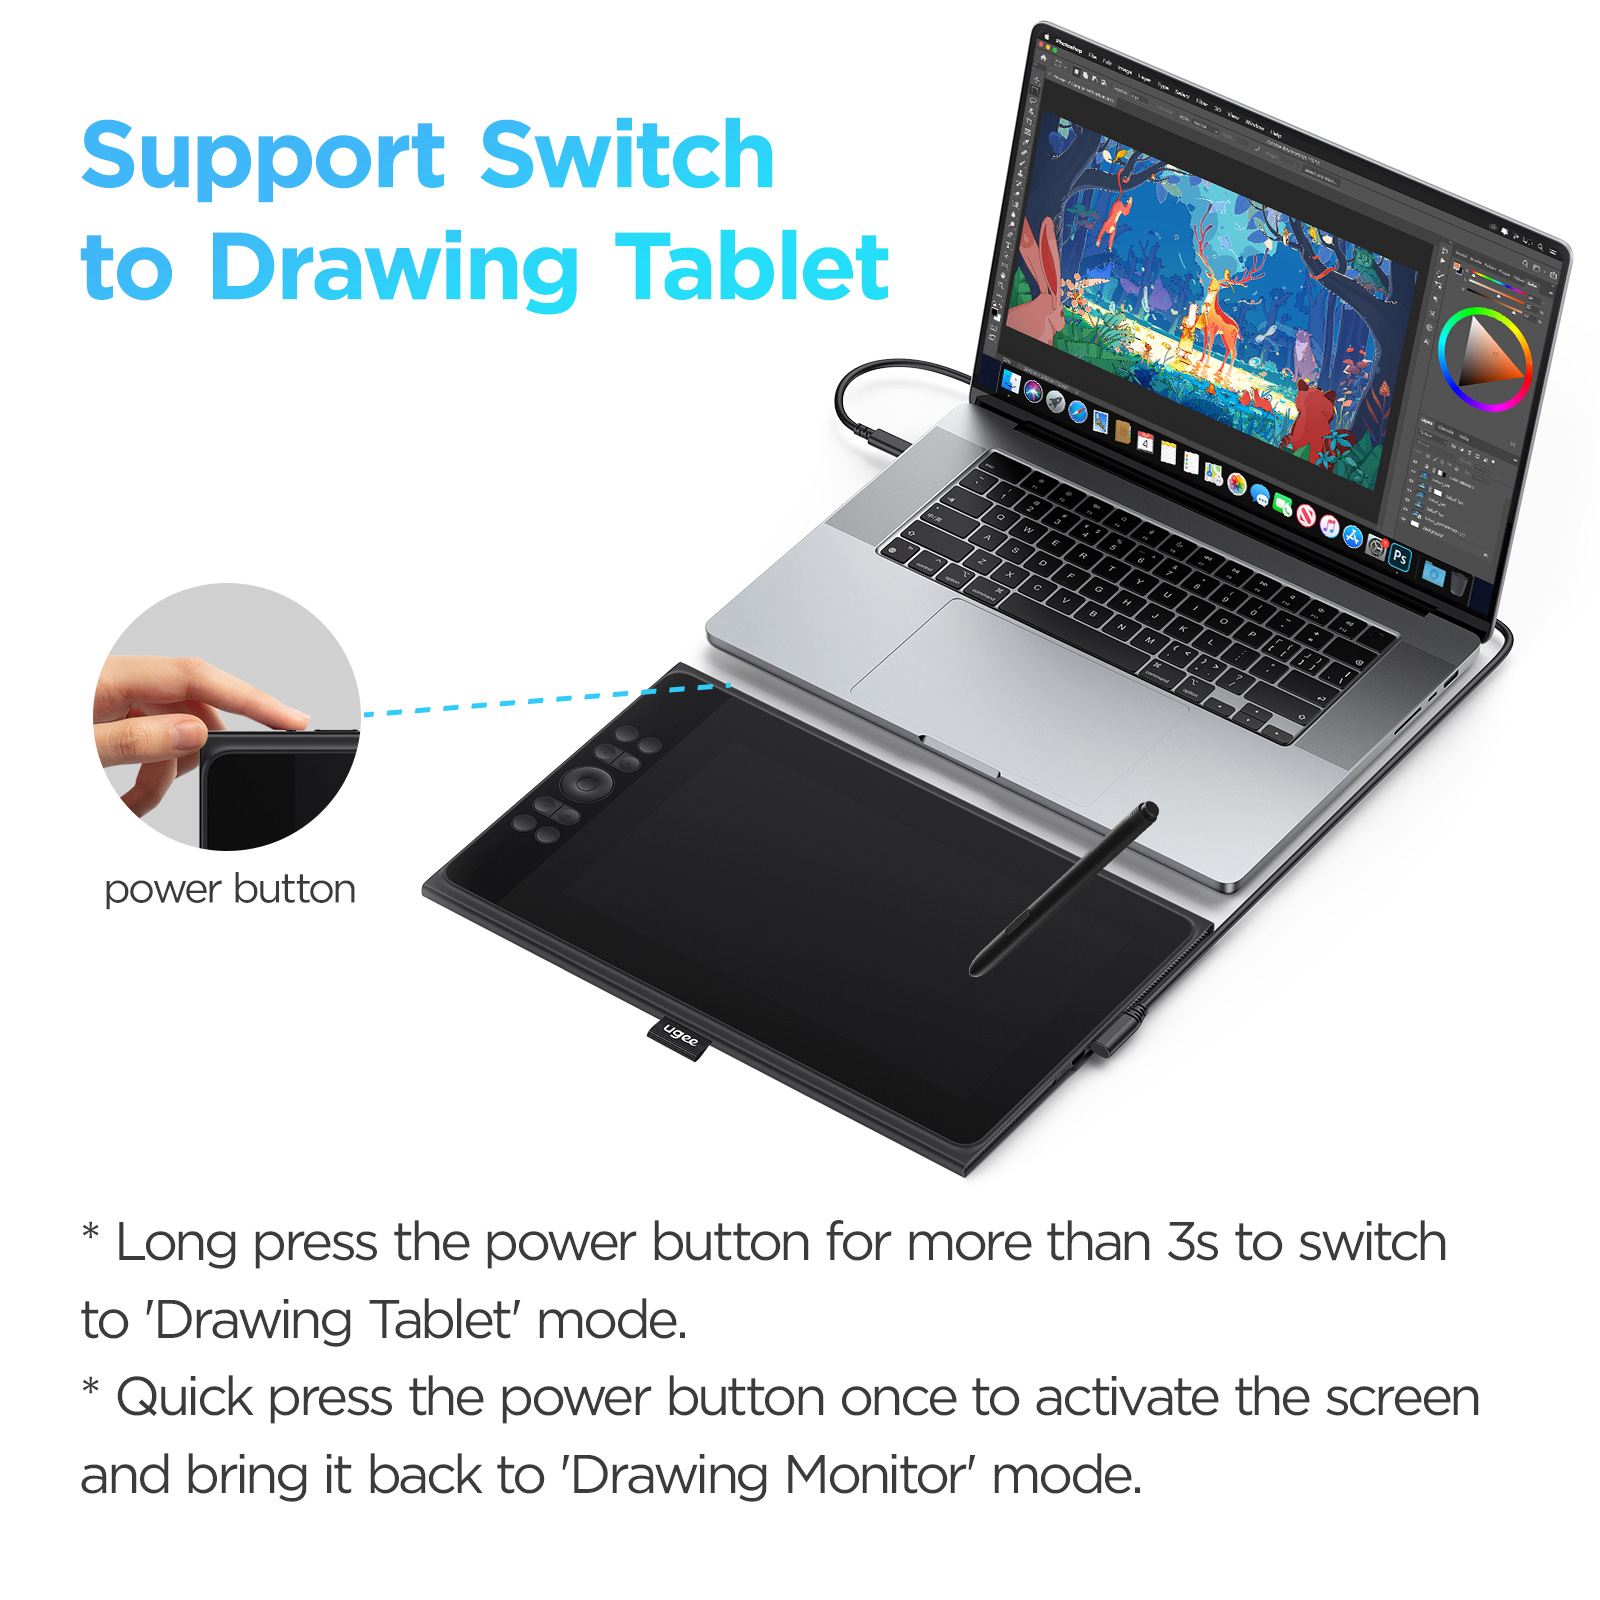 UGEE UE12 PLUS 11.9 inch Drawing Tablet with Full-Laminated Screen, 147%sRGB Pen Display, Compatible with Windows/Mac/Android - image 5 of 13